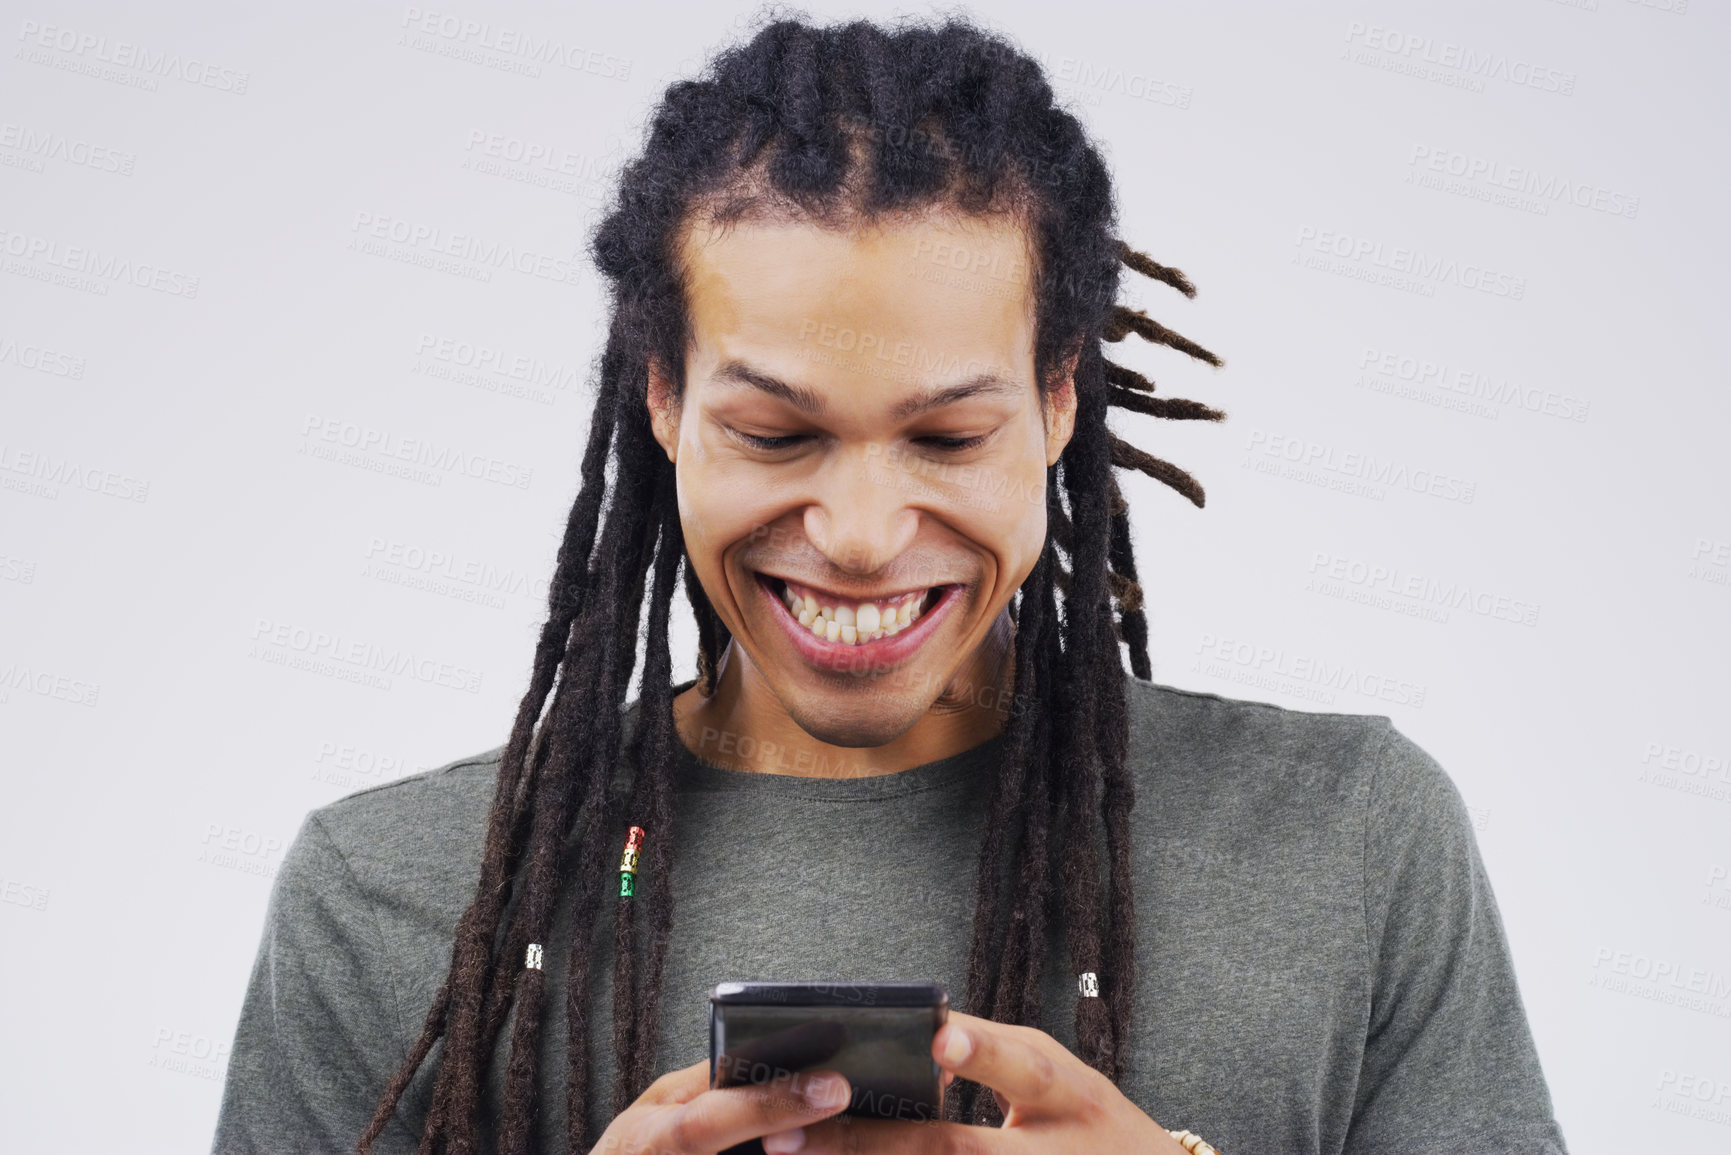 Buy stock photo Studio shot of a happy young man using his cellphone